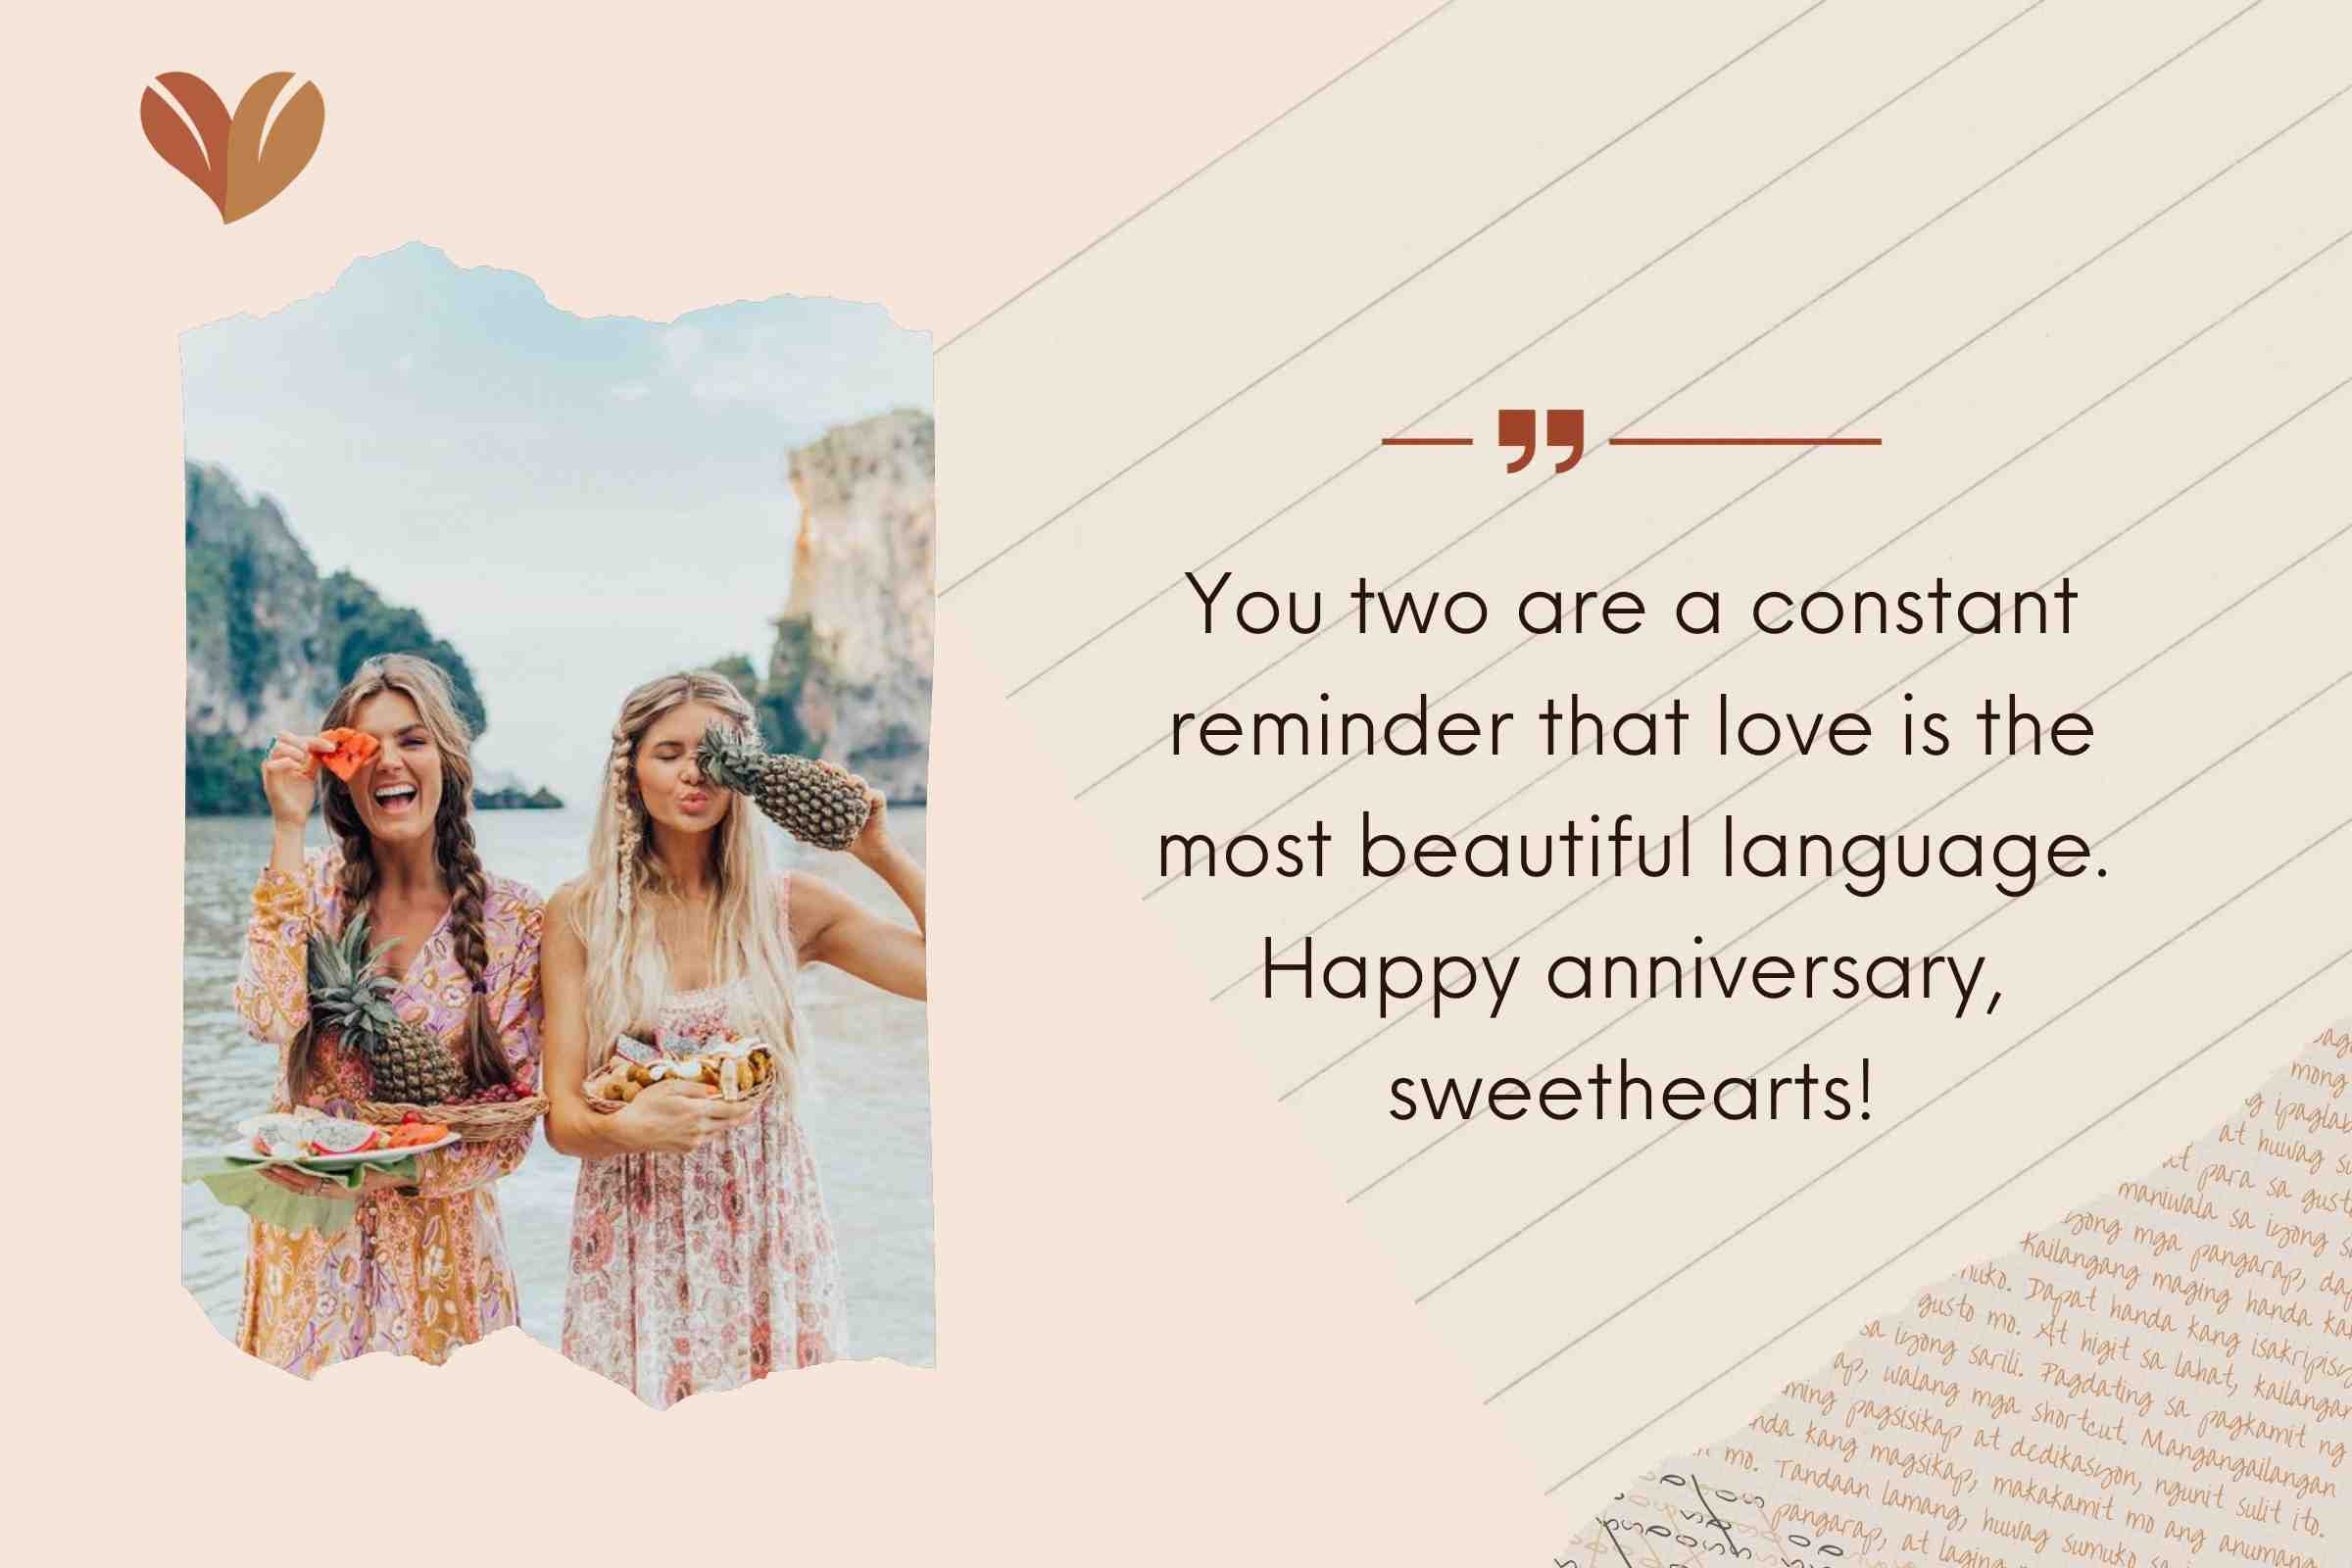 Heartwarming Lesbian Anniversary Quotes to Warm Your Heart by MyMindfulGifts